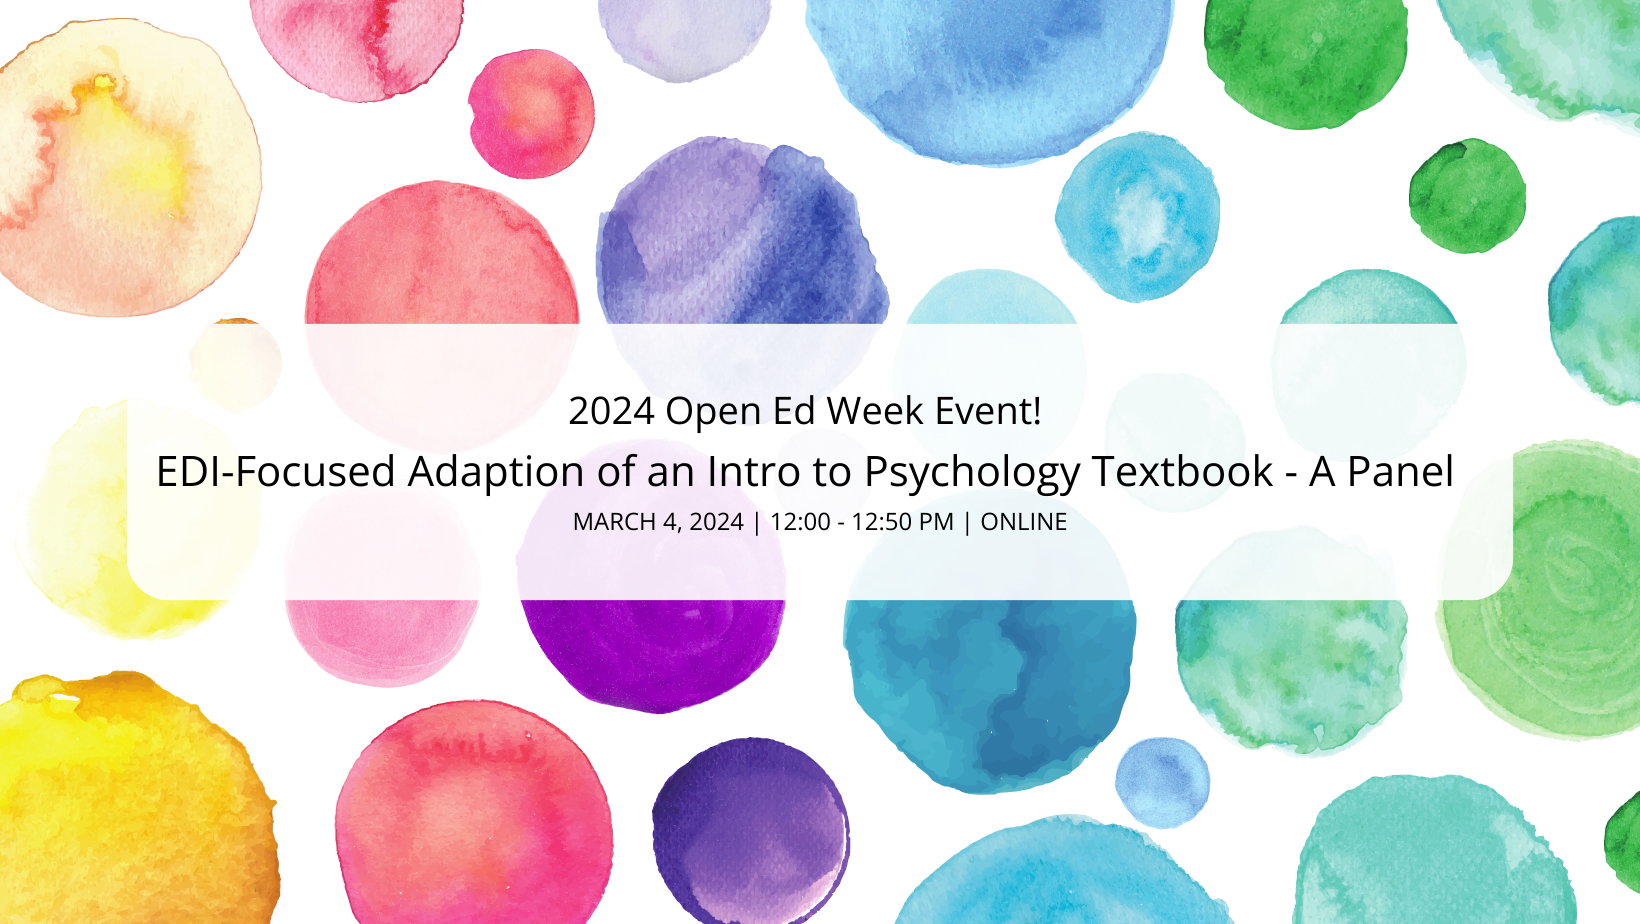 decorative banner for the EDI-focused Intro to Psychology panel event.